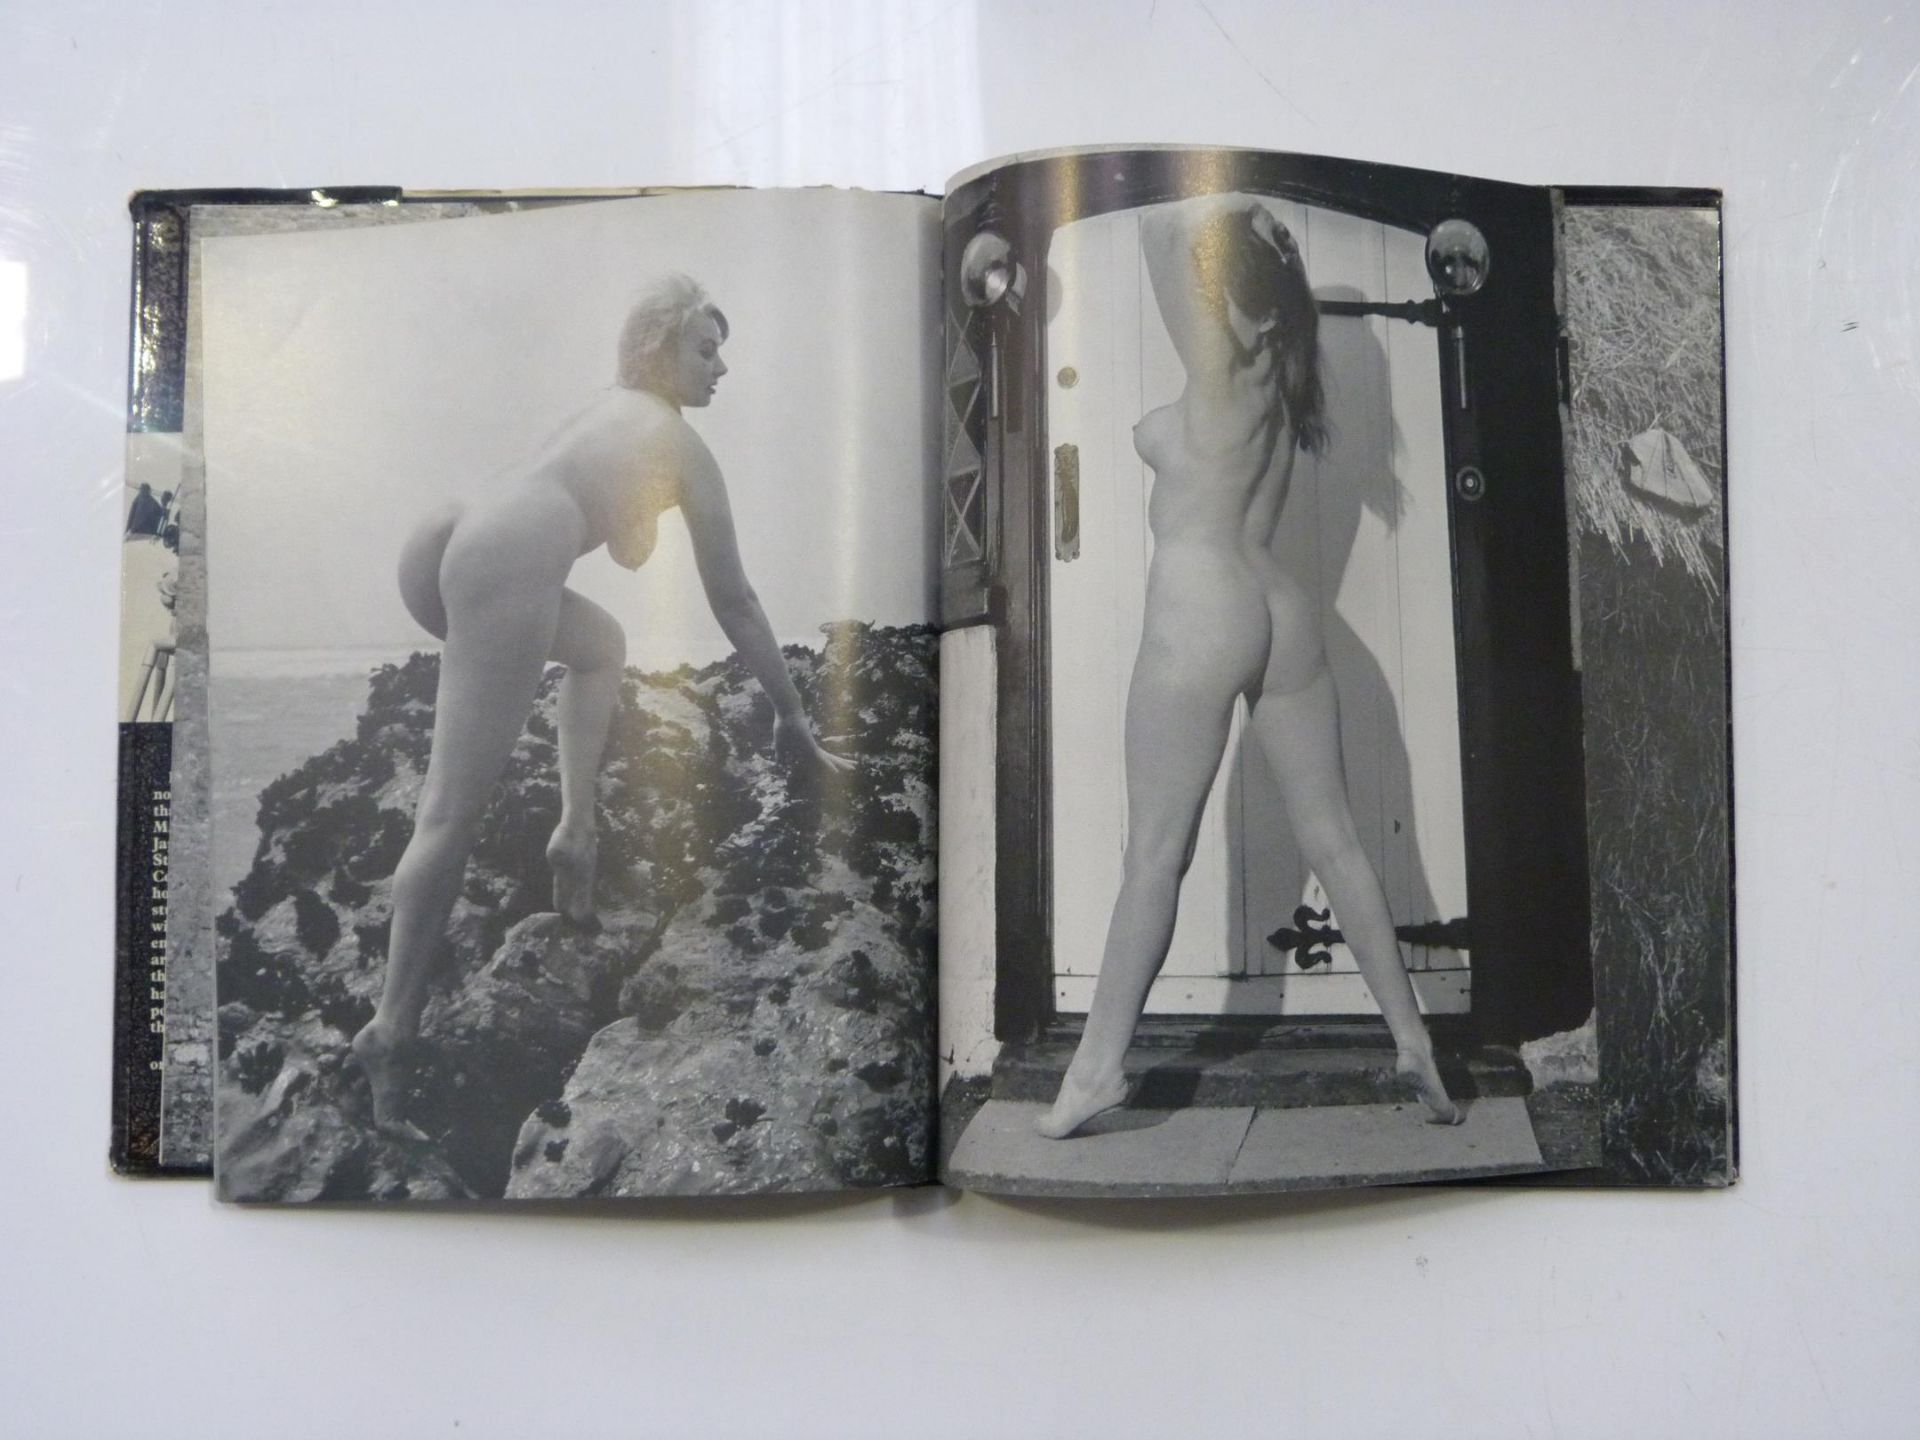 Harrison Marks - 4 various books & 'The Nude' by Andre De Dienes 1956 (est. £30-£50) - Image 2 of 14